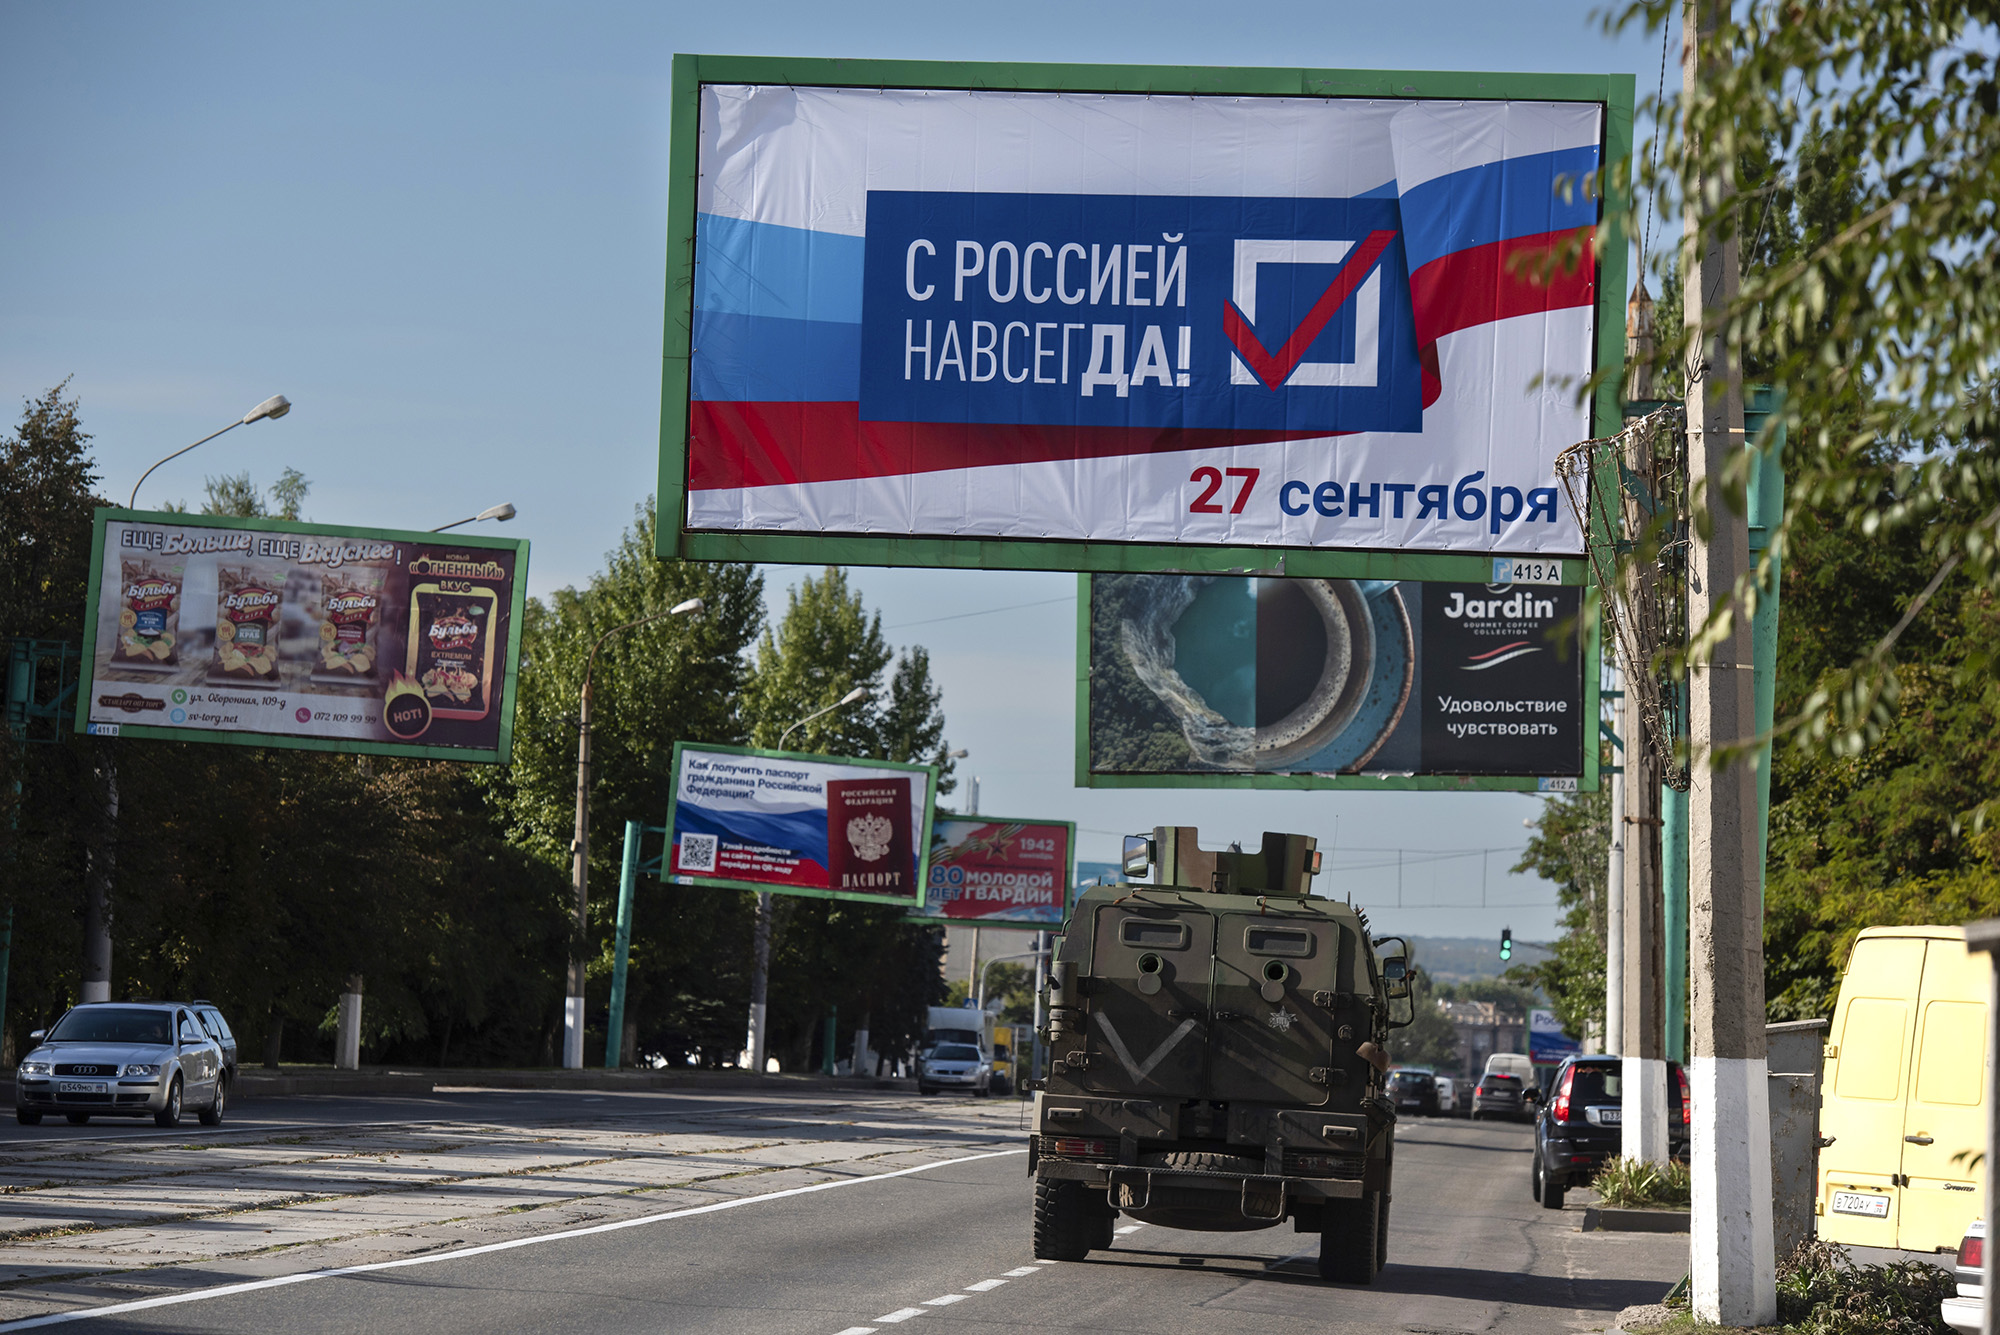 A military vehicle drives along a street with a billboard reading 